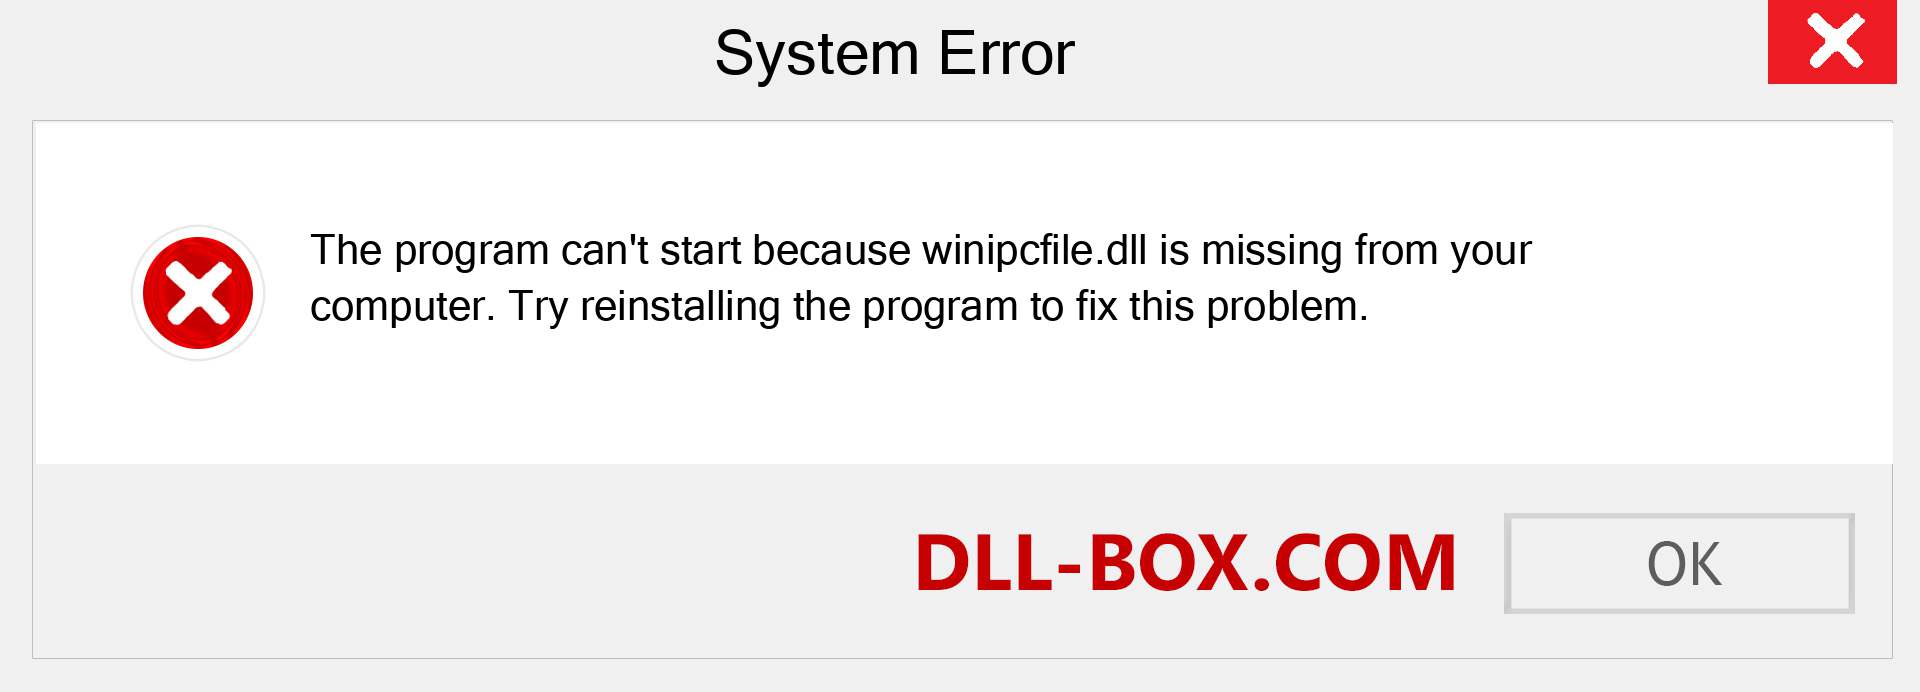  winipcfile.dll file is missing?. Download for Windows 7, 8, 10 - Fix  winipcfile dll Missing Error on Windows, photos, images